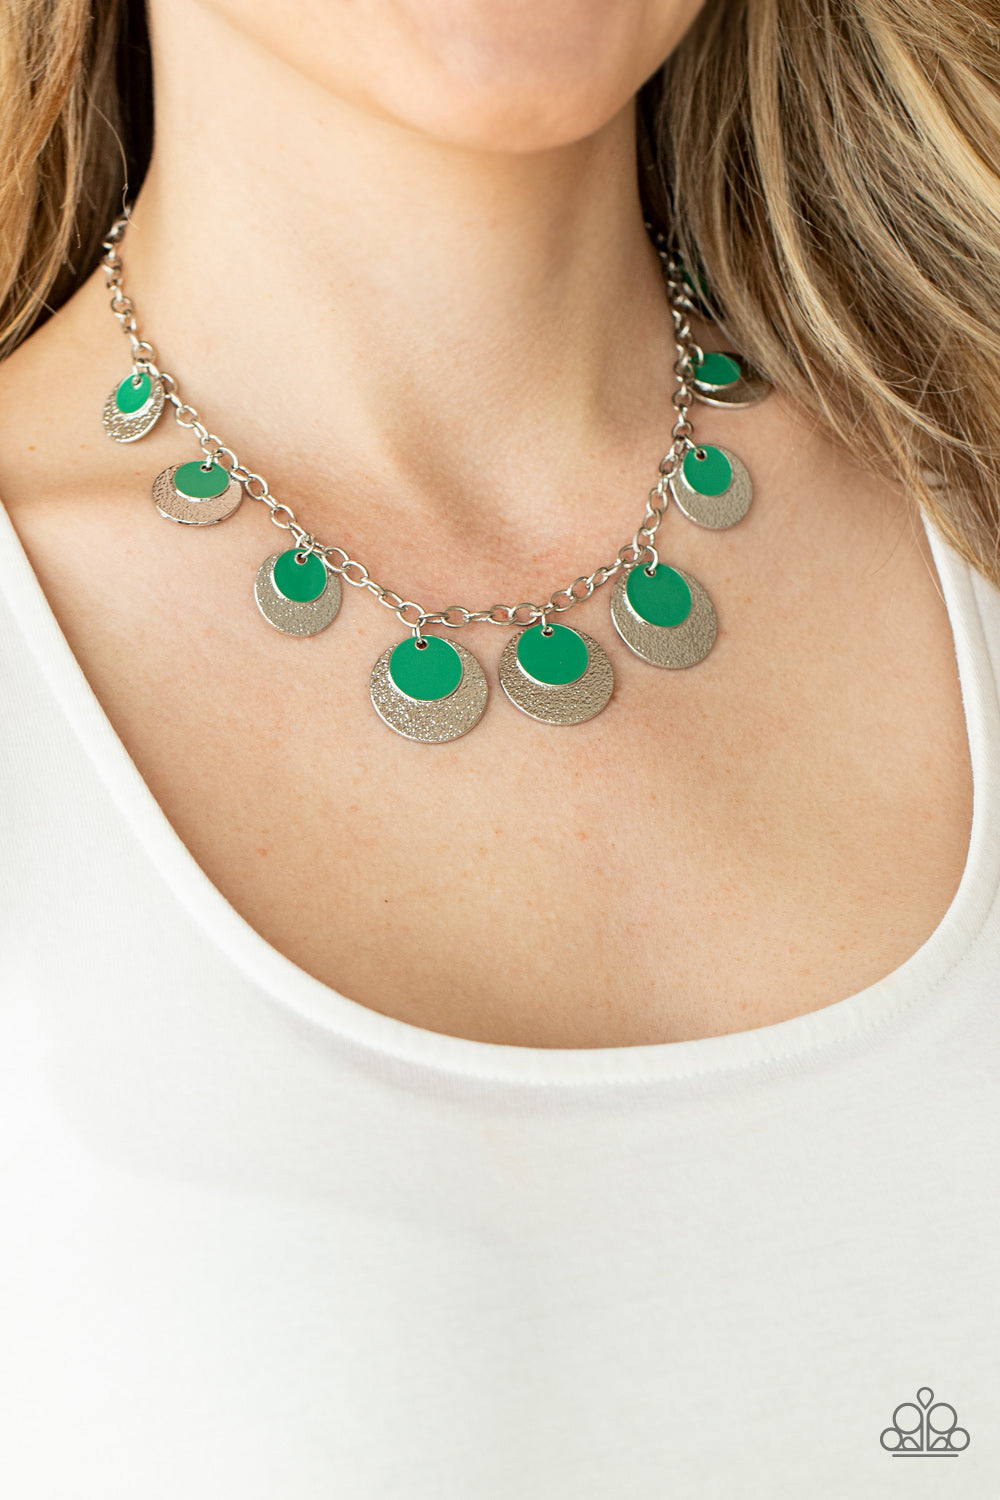 Paparazzi - The Cosmos Are Calling - Green Necklace